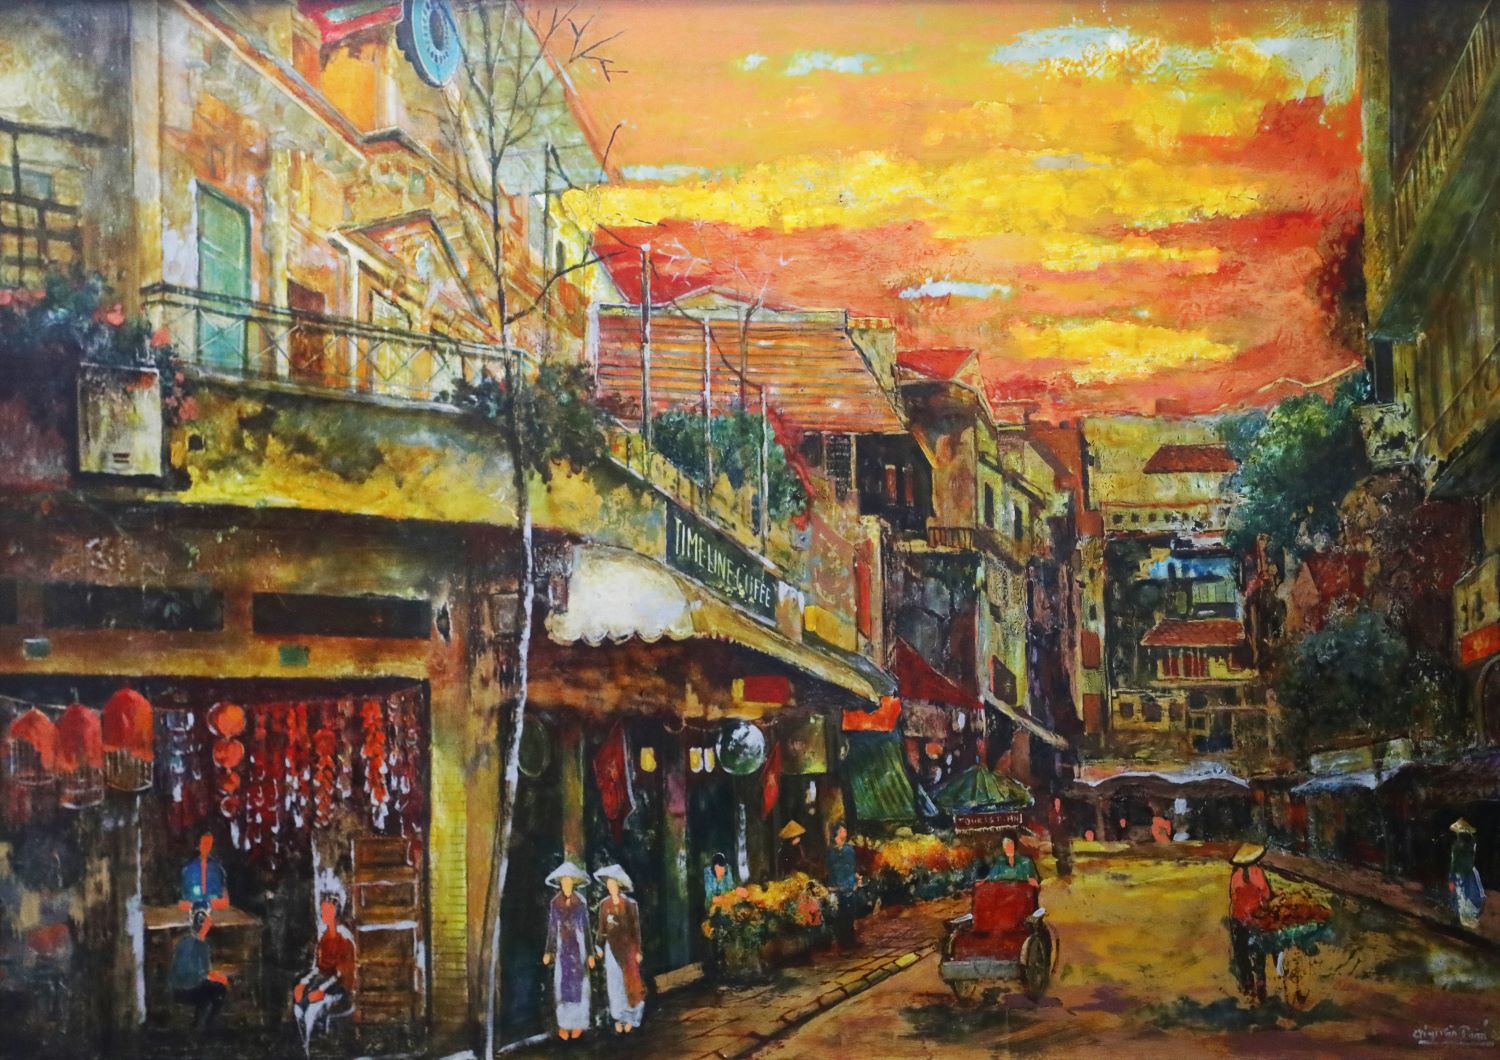 Timeline - Vietnamese Lacquer Paintings by Artist Giap Tuan